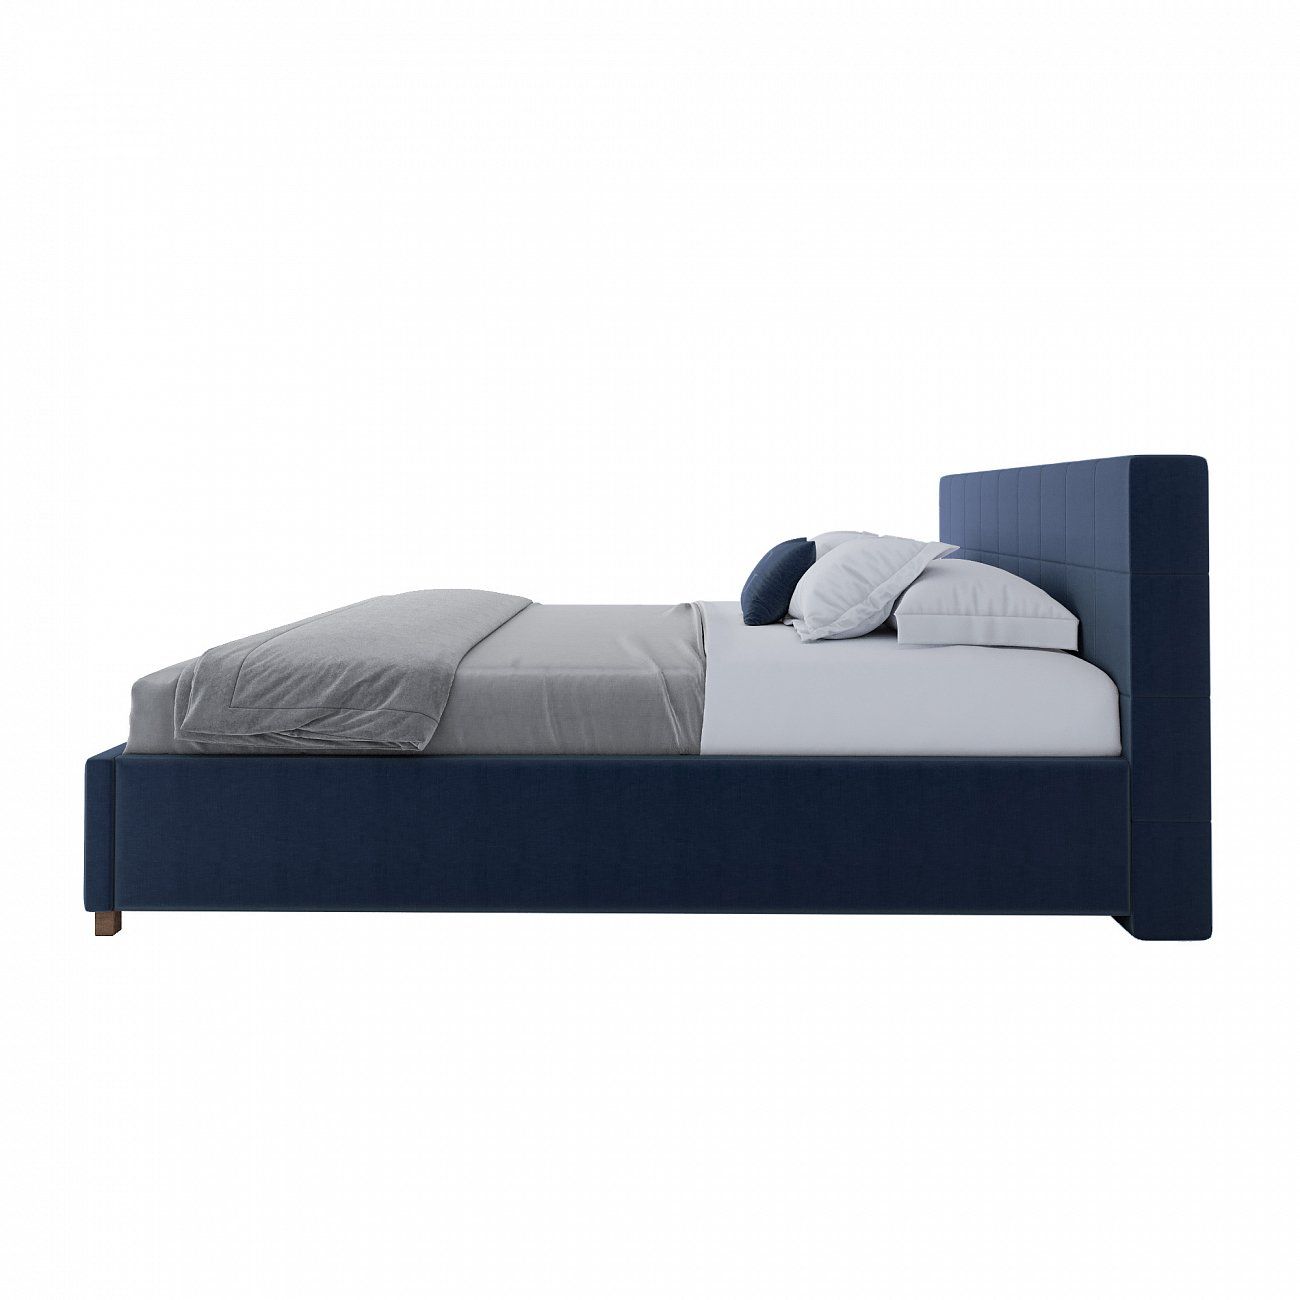 Large bed 200x200 Wales blue